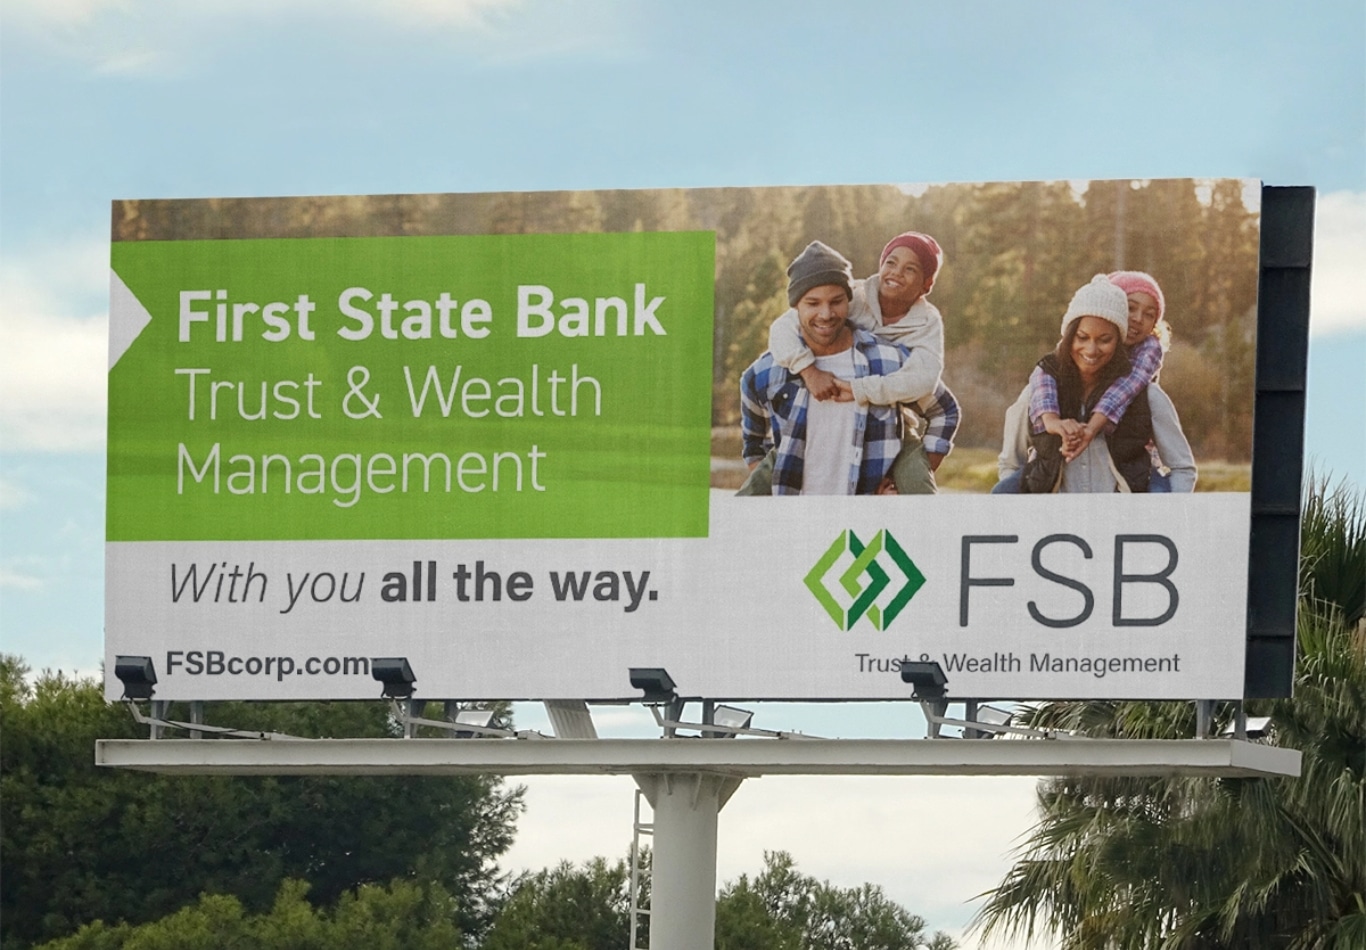 Billboard featuring First State Bank